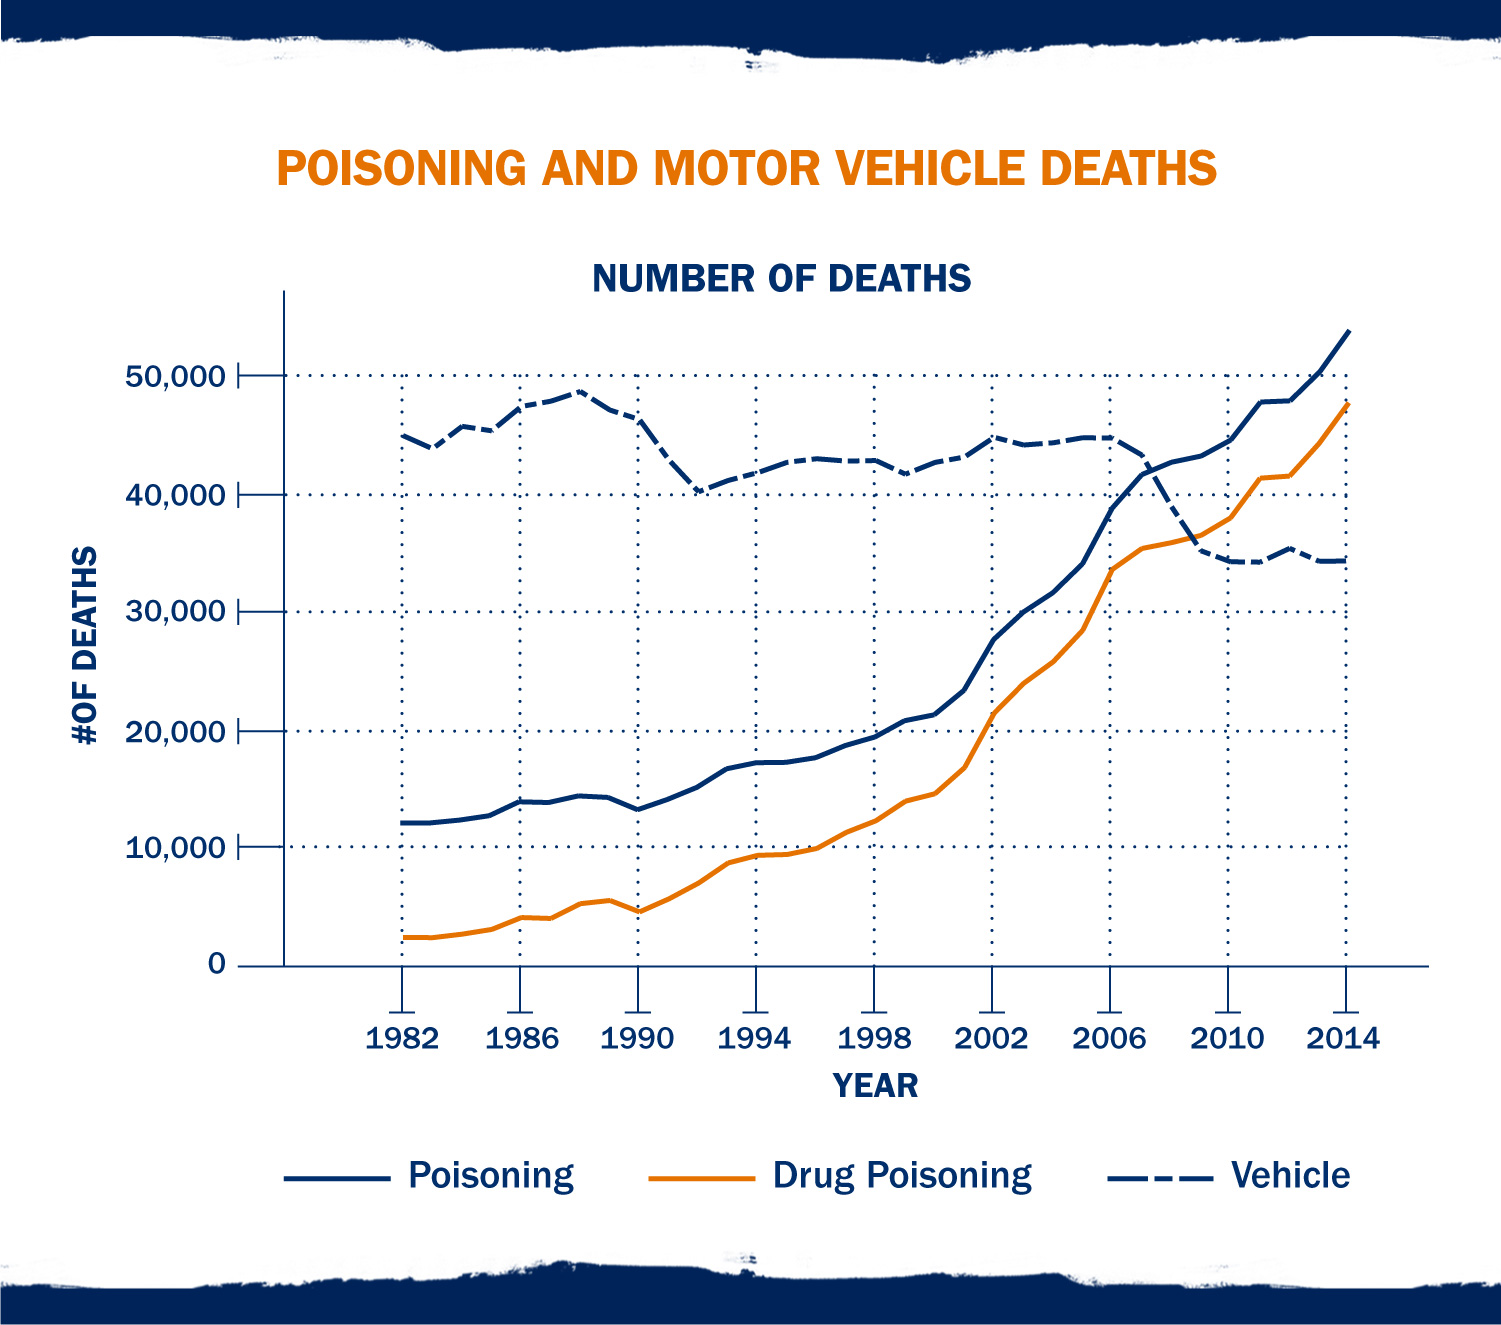 Graph: Poisoning and Motor Vehicle Deaths from 1982 to 2014